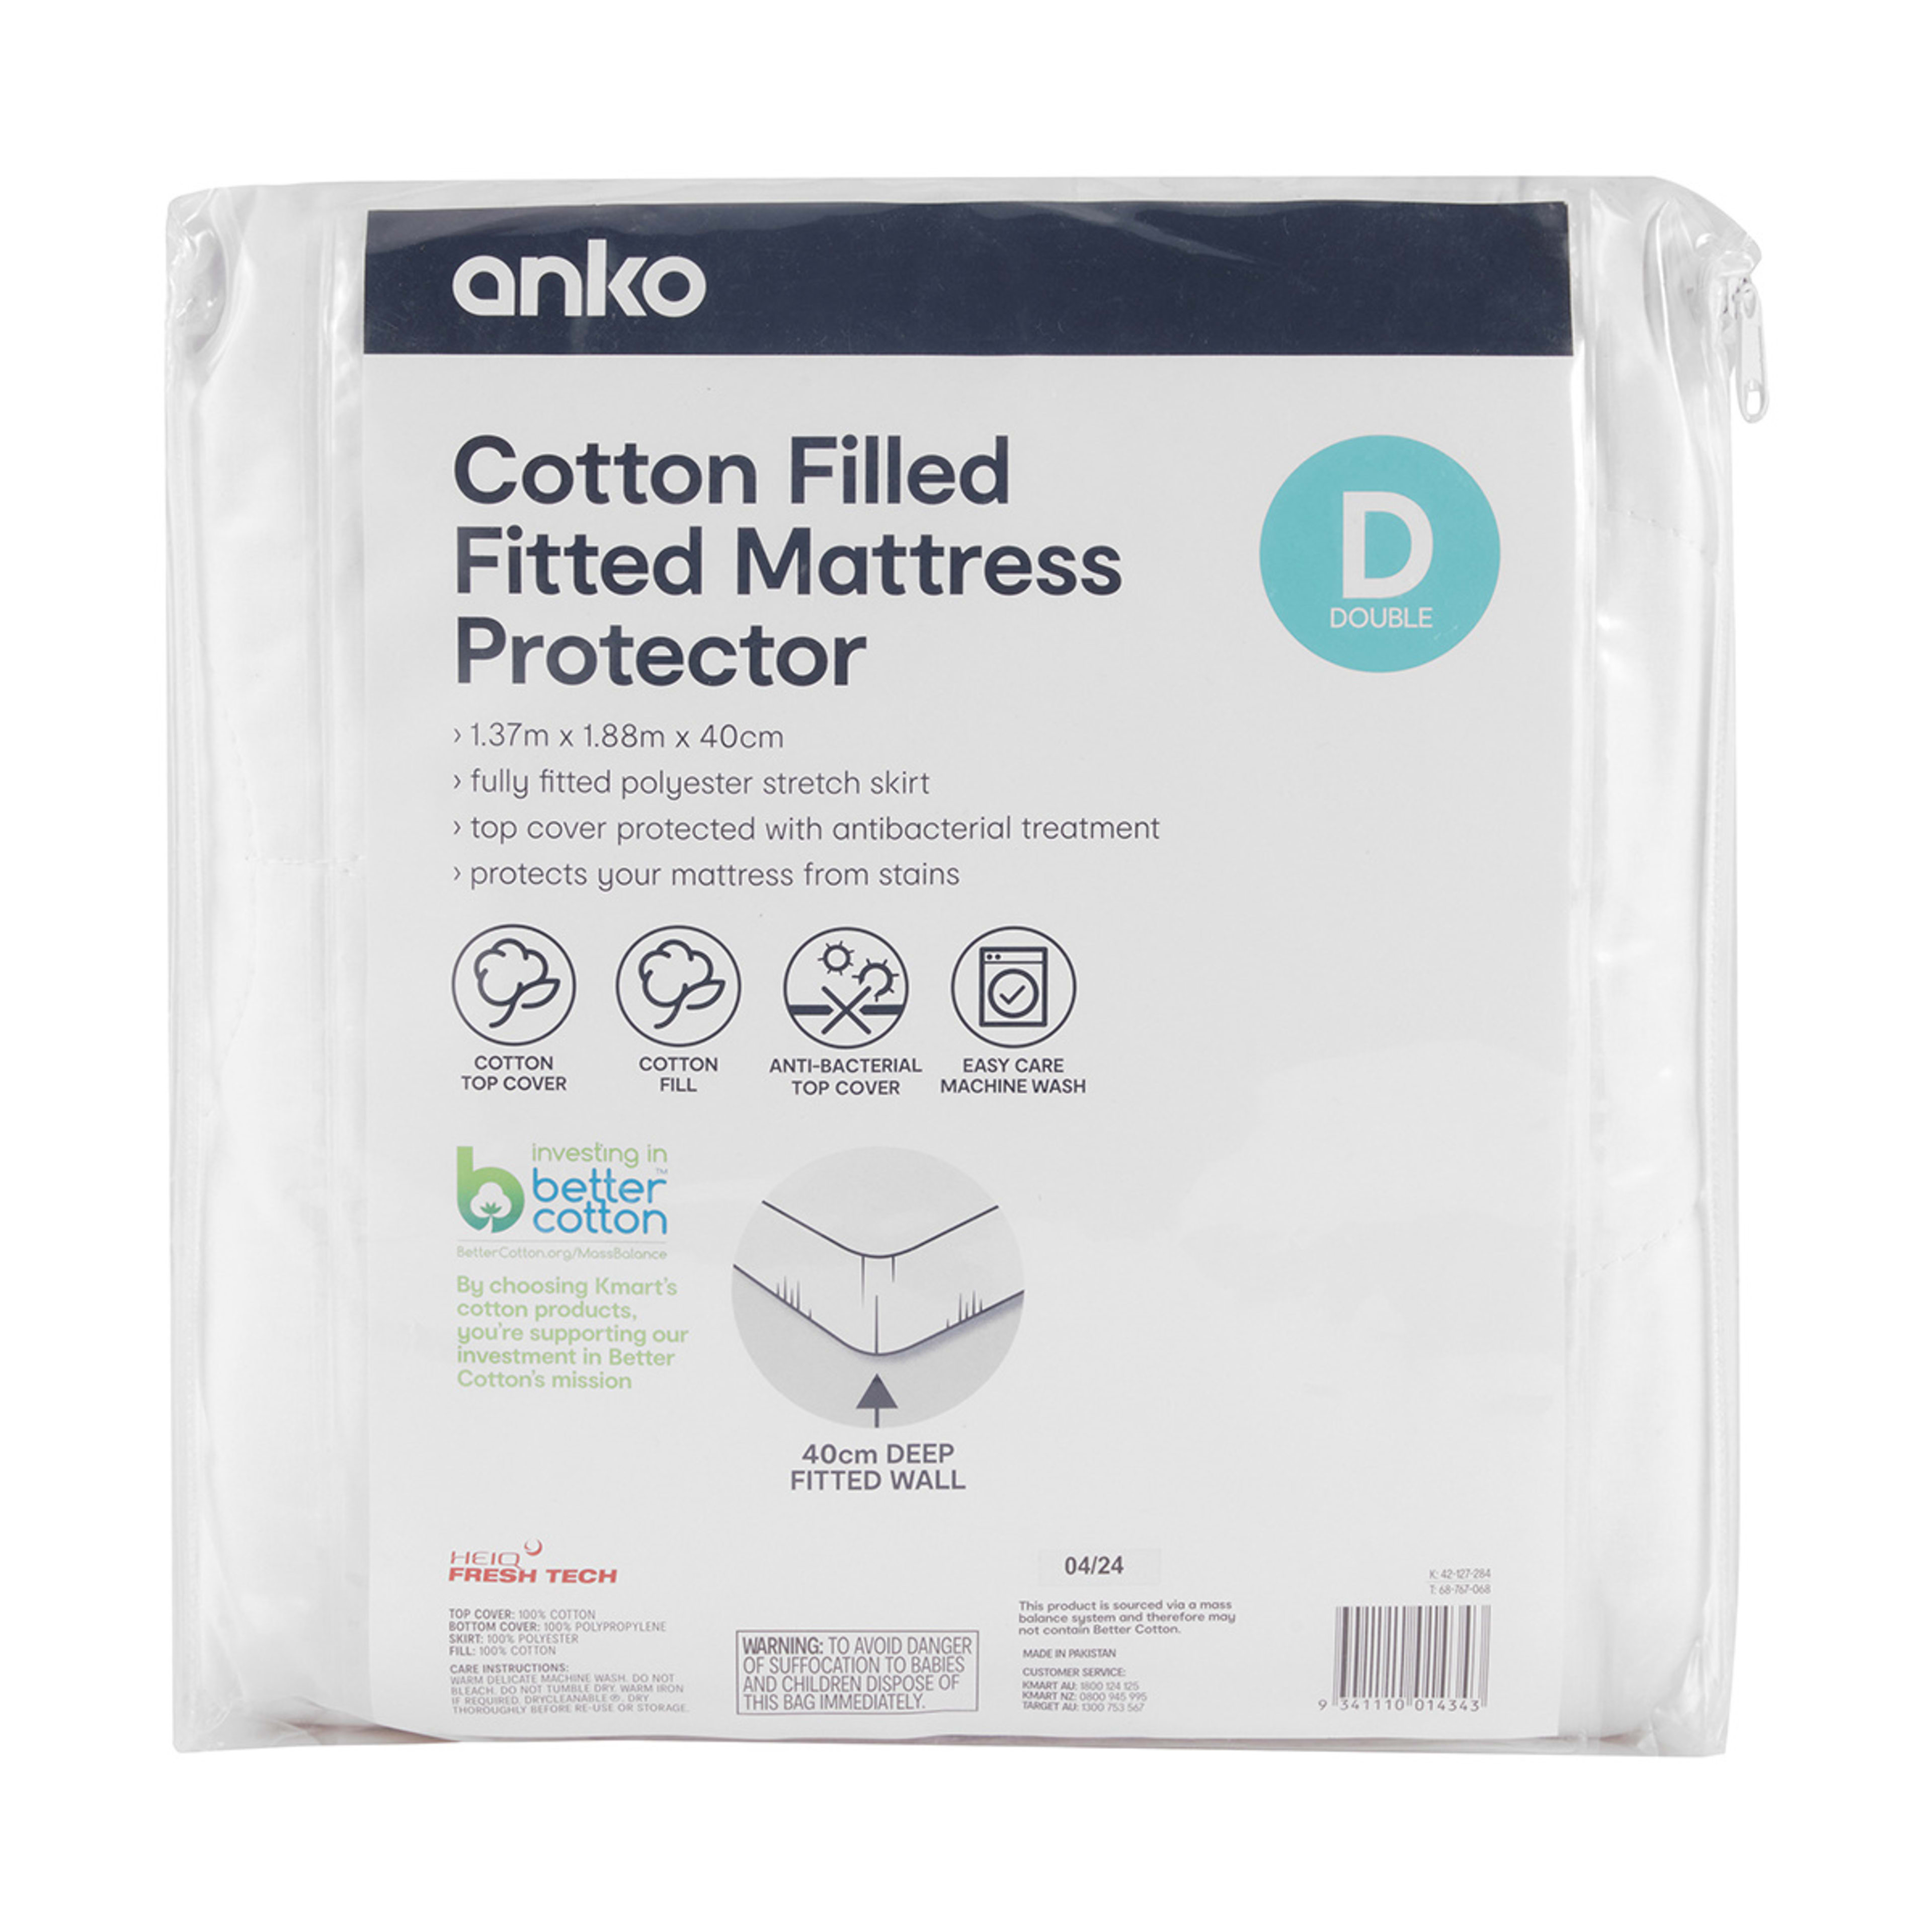 Cotton Filled Fitted Mattress Protector - Double Bed